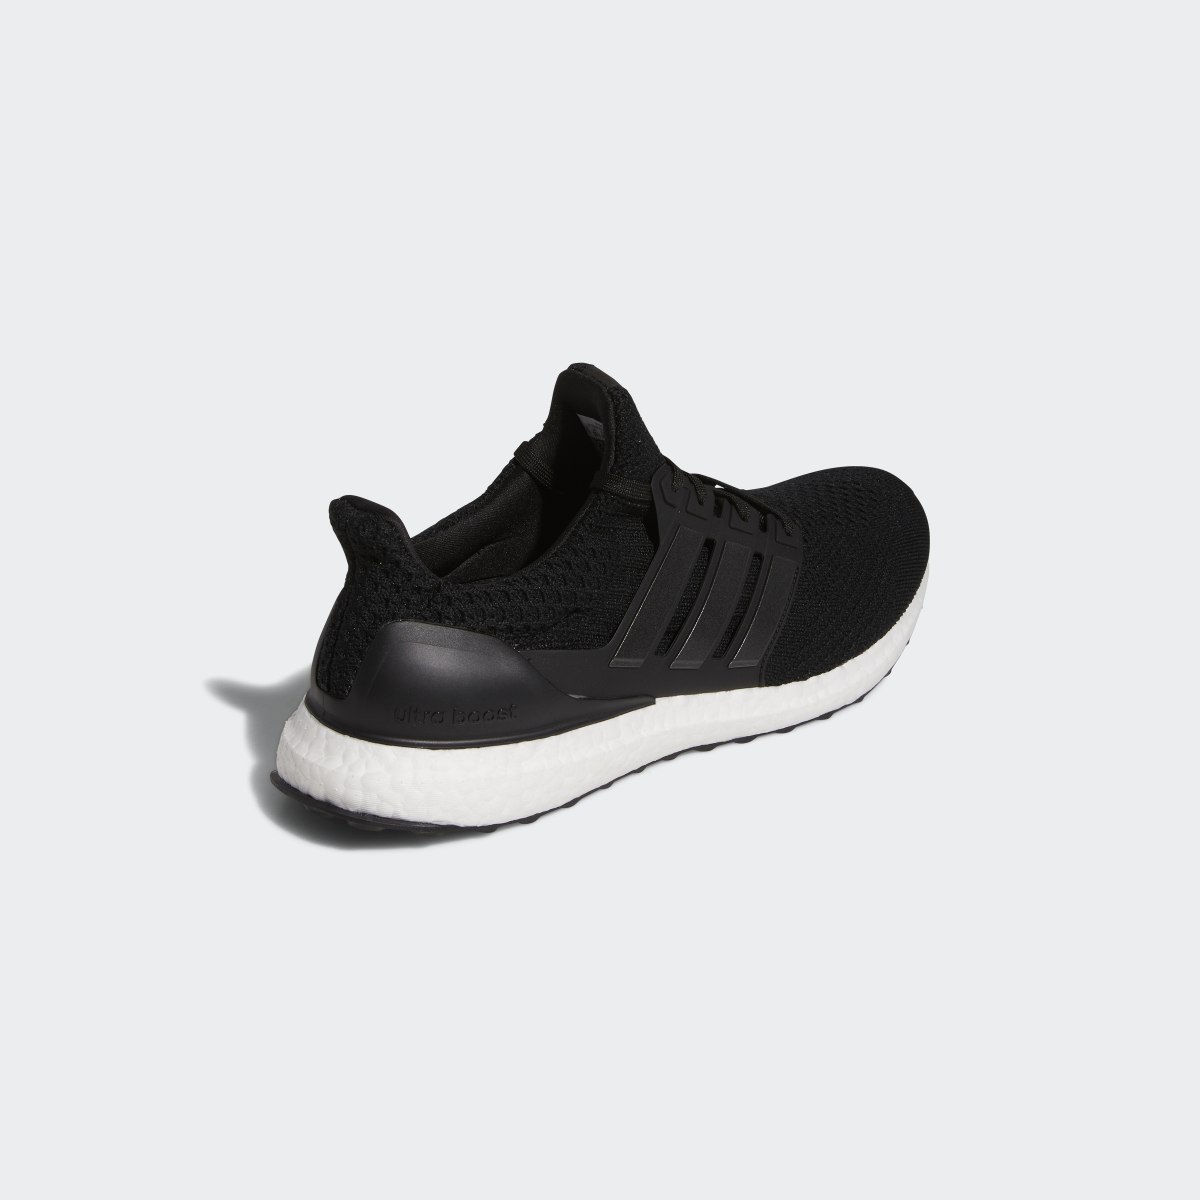 Adidas Ultraboost 5 DNA Running Lifestyle Shoes. 9